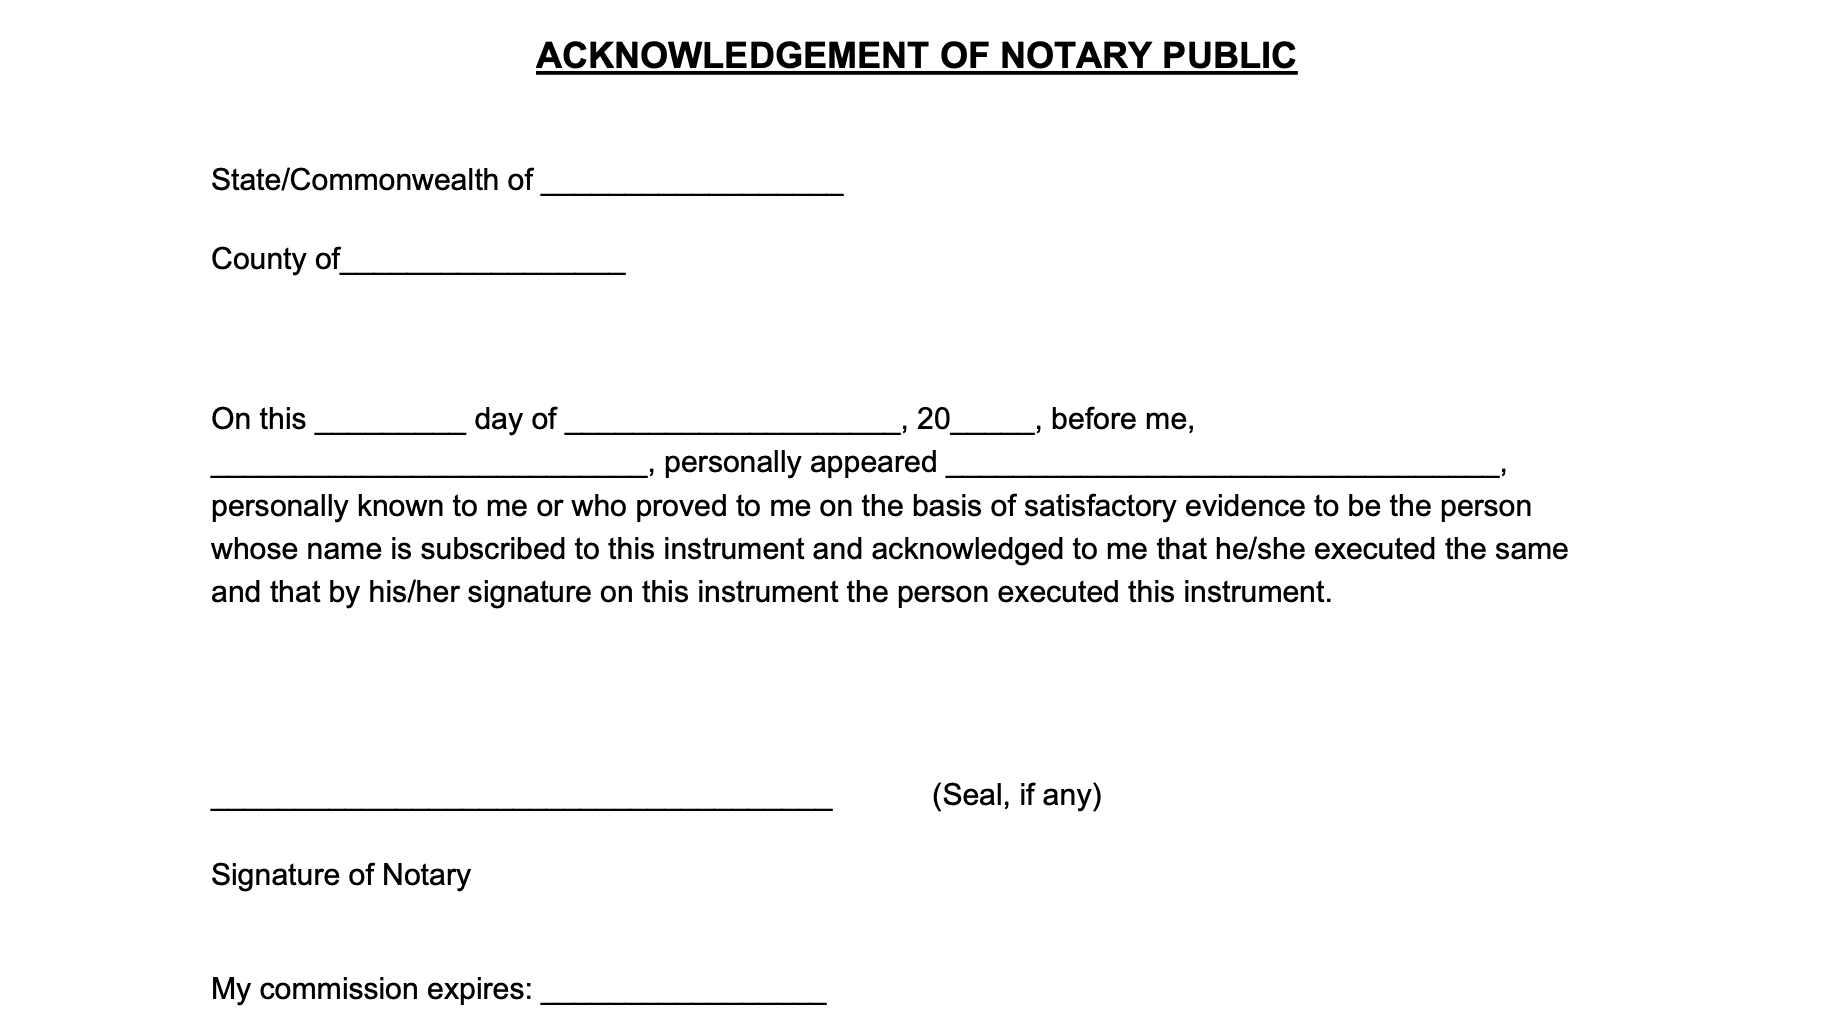 An example of where to insert notary acknowledgment in our employment verification letter